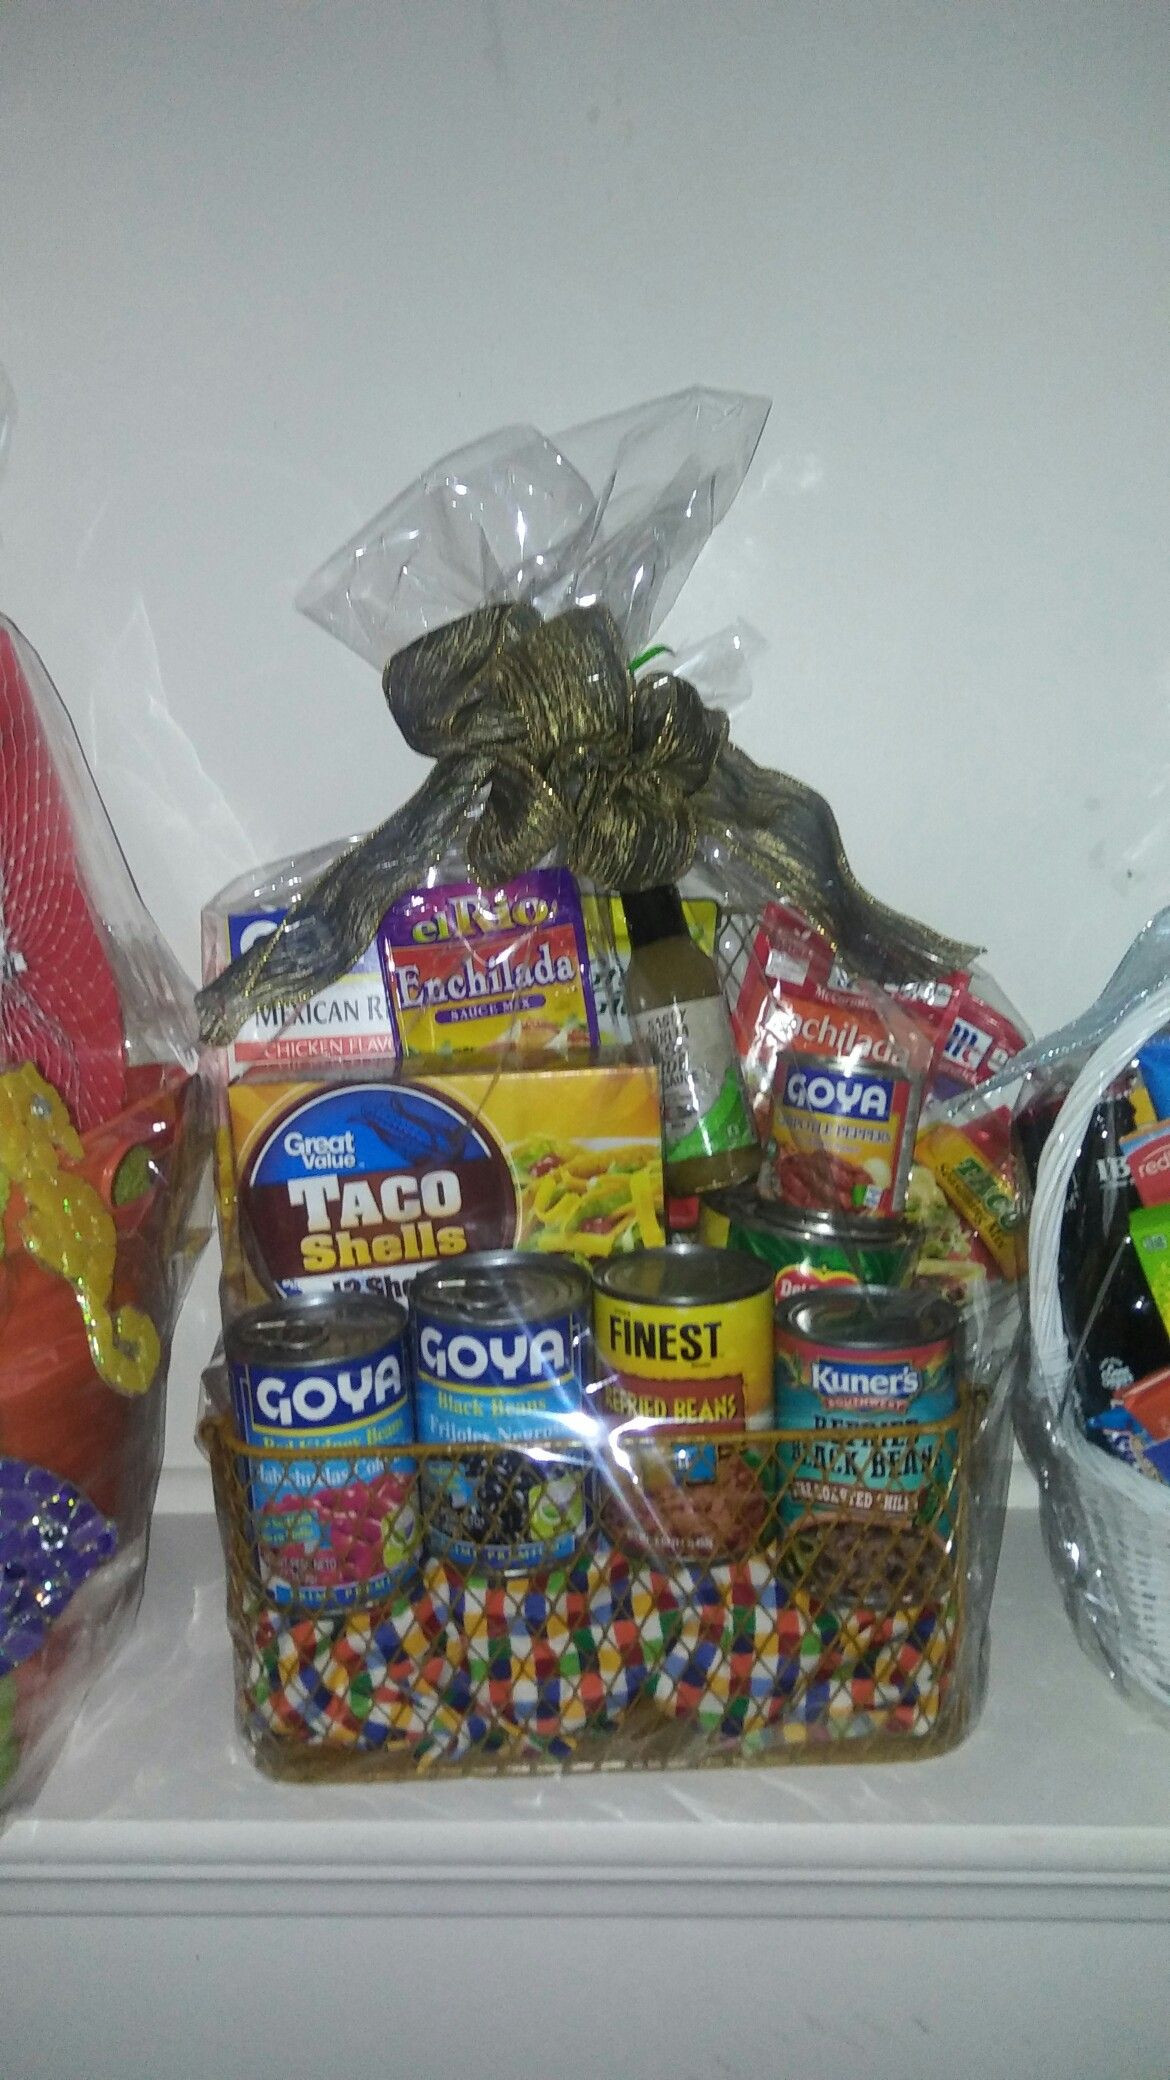 Mexican Themed Gift Basket Ideas
 Mexican dinner